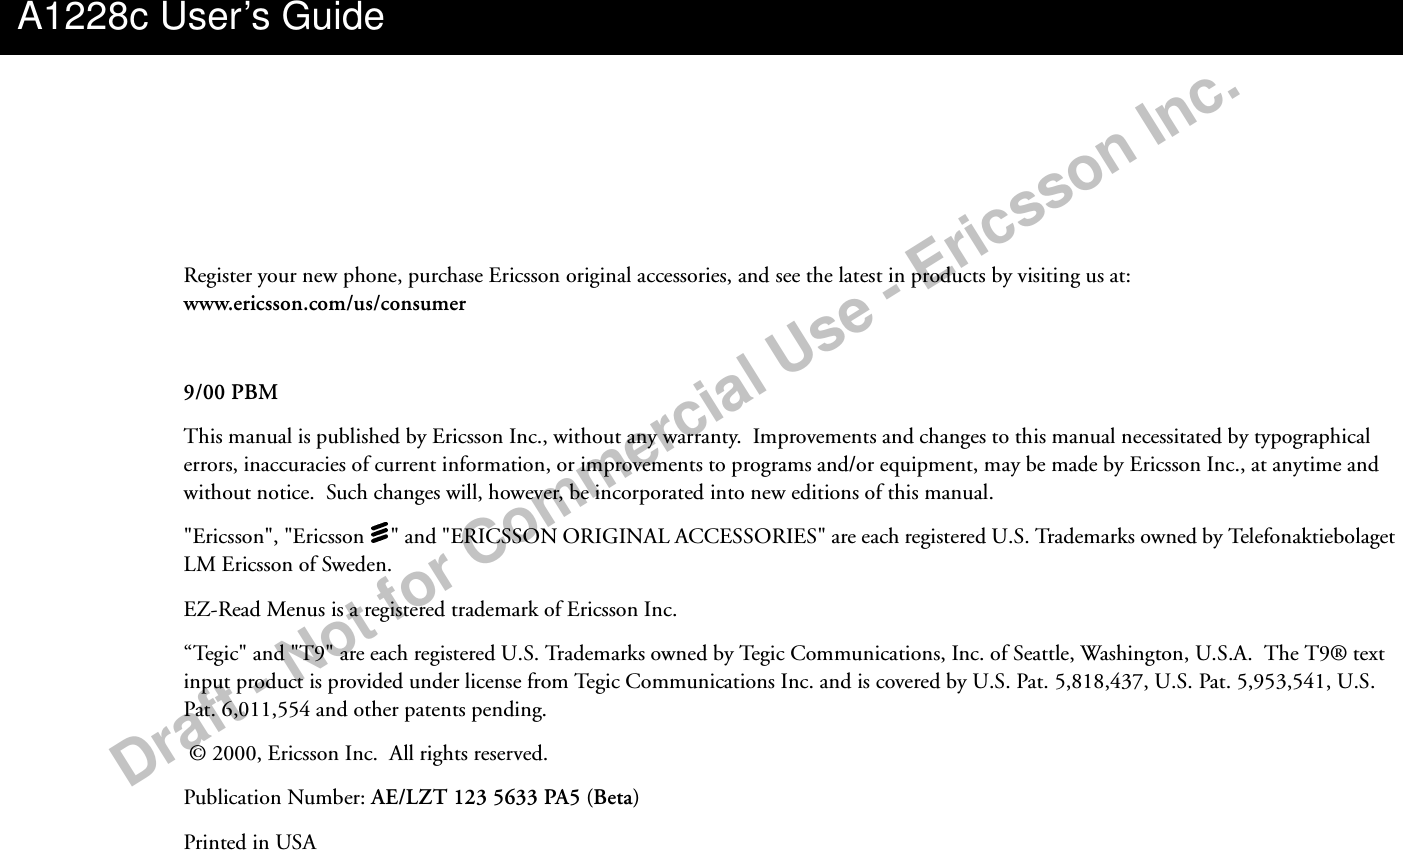 Draft - Not for Commercial Use - Ericsson Inc.Register your new phone, purchase Ericsson original accessories, and see the latest in products by visiting us at: www.ericsson.com/us/consumer9/00 PBMThis manual is published by Ericsson Inc., without any warranty.  Improvements and changes to this manual necessitated by typographical errors, inaccuracies of current information, or improvements to programs and/or equipment, may be made by Ericsson Inc., at anytime and without notice.  Such changes will, however, be incorporated into new editions of this manual.&quot;Ericsson&quot;, &quot;Ericsson  &quot; and &quot;ERICSSON ORIGINAL ACCESSORIES&quot; are each registered U.S. Trademarks owned by Telefonaktiebolaget LM Ericsson of Sweden.EZ-Read Menus is a registered trademark of Ericsson Inc.“Tegic&quot; and &quot;T9&quot; are each registered U.S. Trademarks owned by Tegic Communications, Inc. of Seattle, Washington, U.S.A.  The T9® text input product is provided under license from Tegic Communications Inc. and is covered by U.S. Pat. 5,818,437, U.S. Pat. 5,953,541, U.S. Pat. 6,011,554 and other patents pending.   © 2000, Ericsson Inc.  All rights reserved.Publication Number: AE/LZT 123 5633 PA5 (Beta)Printed in USAA1228c User’s Guide